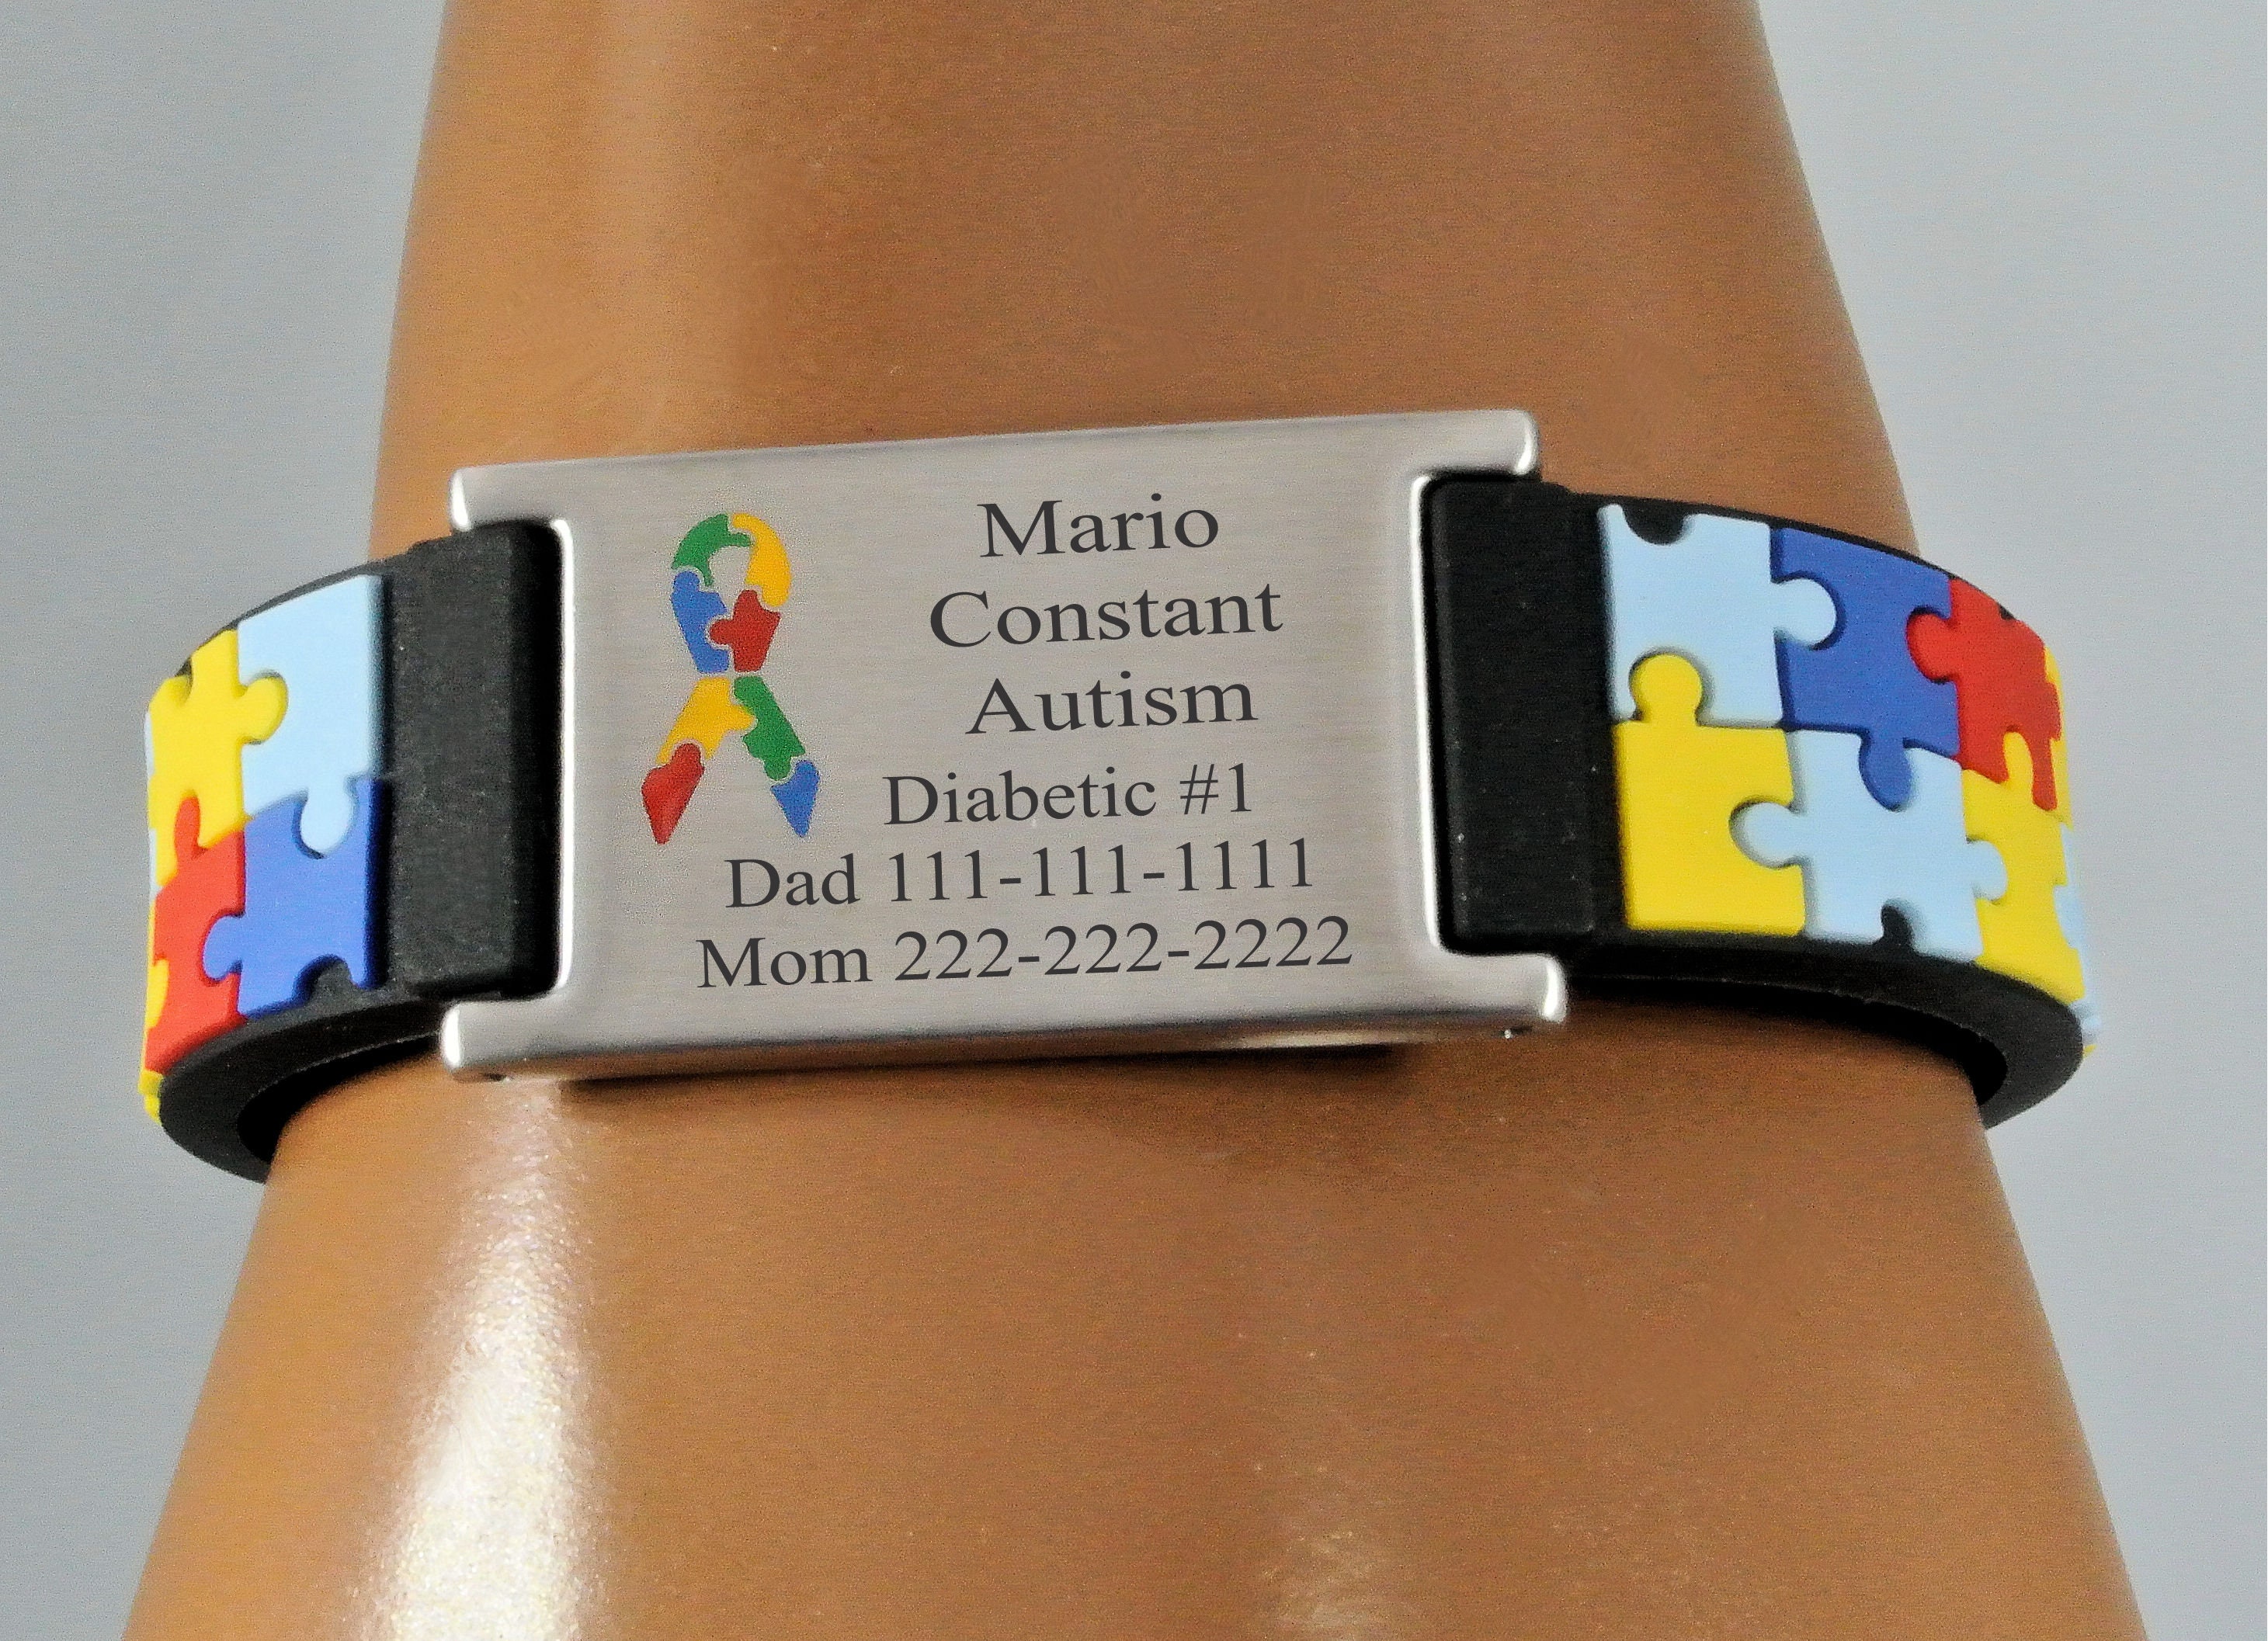 MTLEE Autism Bracelet Inspirational Autism Awareness Wristbands Autism  Colorful Silicone Motivational Wristbands for Kids Adult Man Woman Gifts,  Silicone : Amazon.com.au: Clothing, Shoes & Accessories